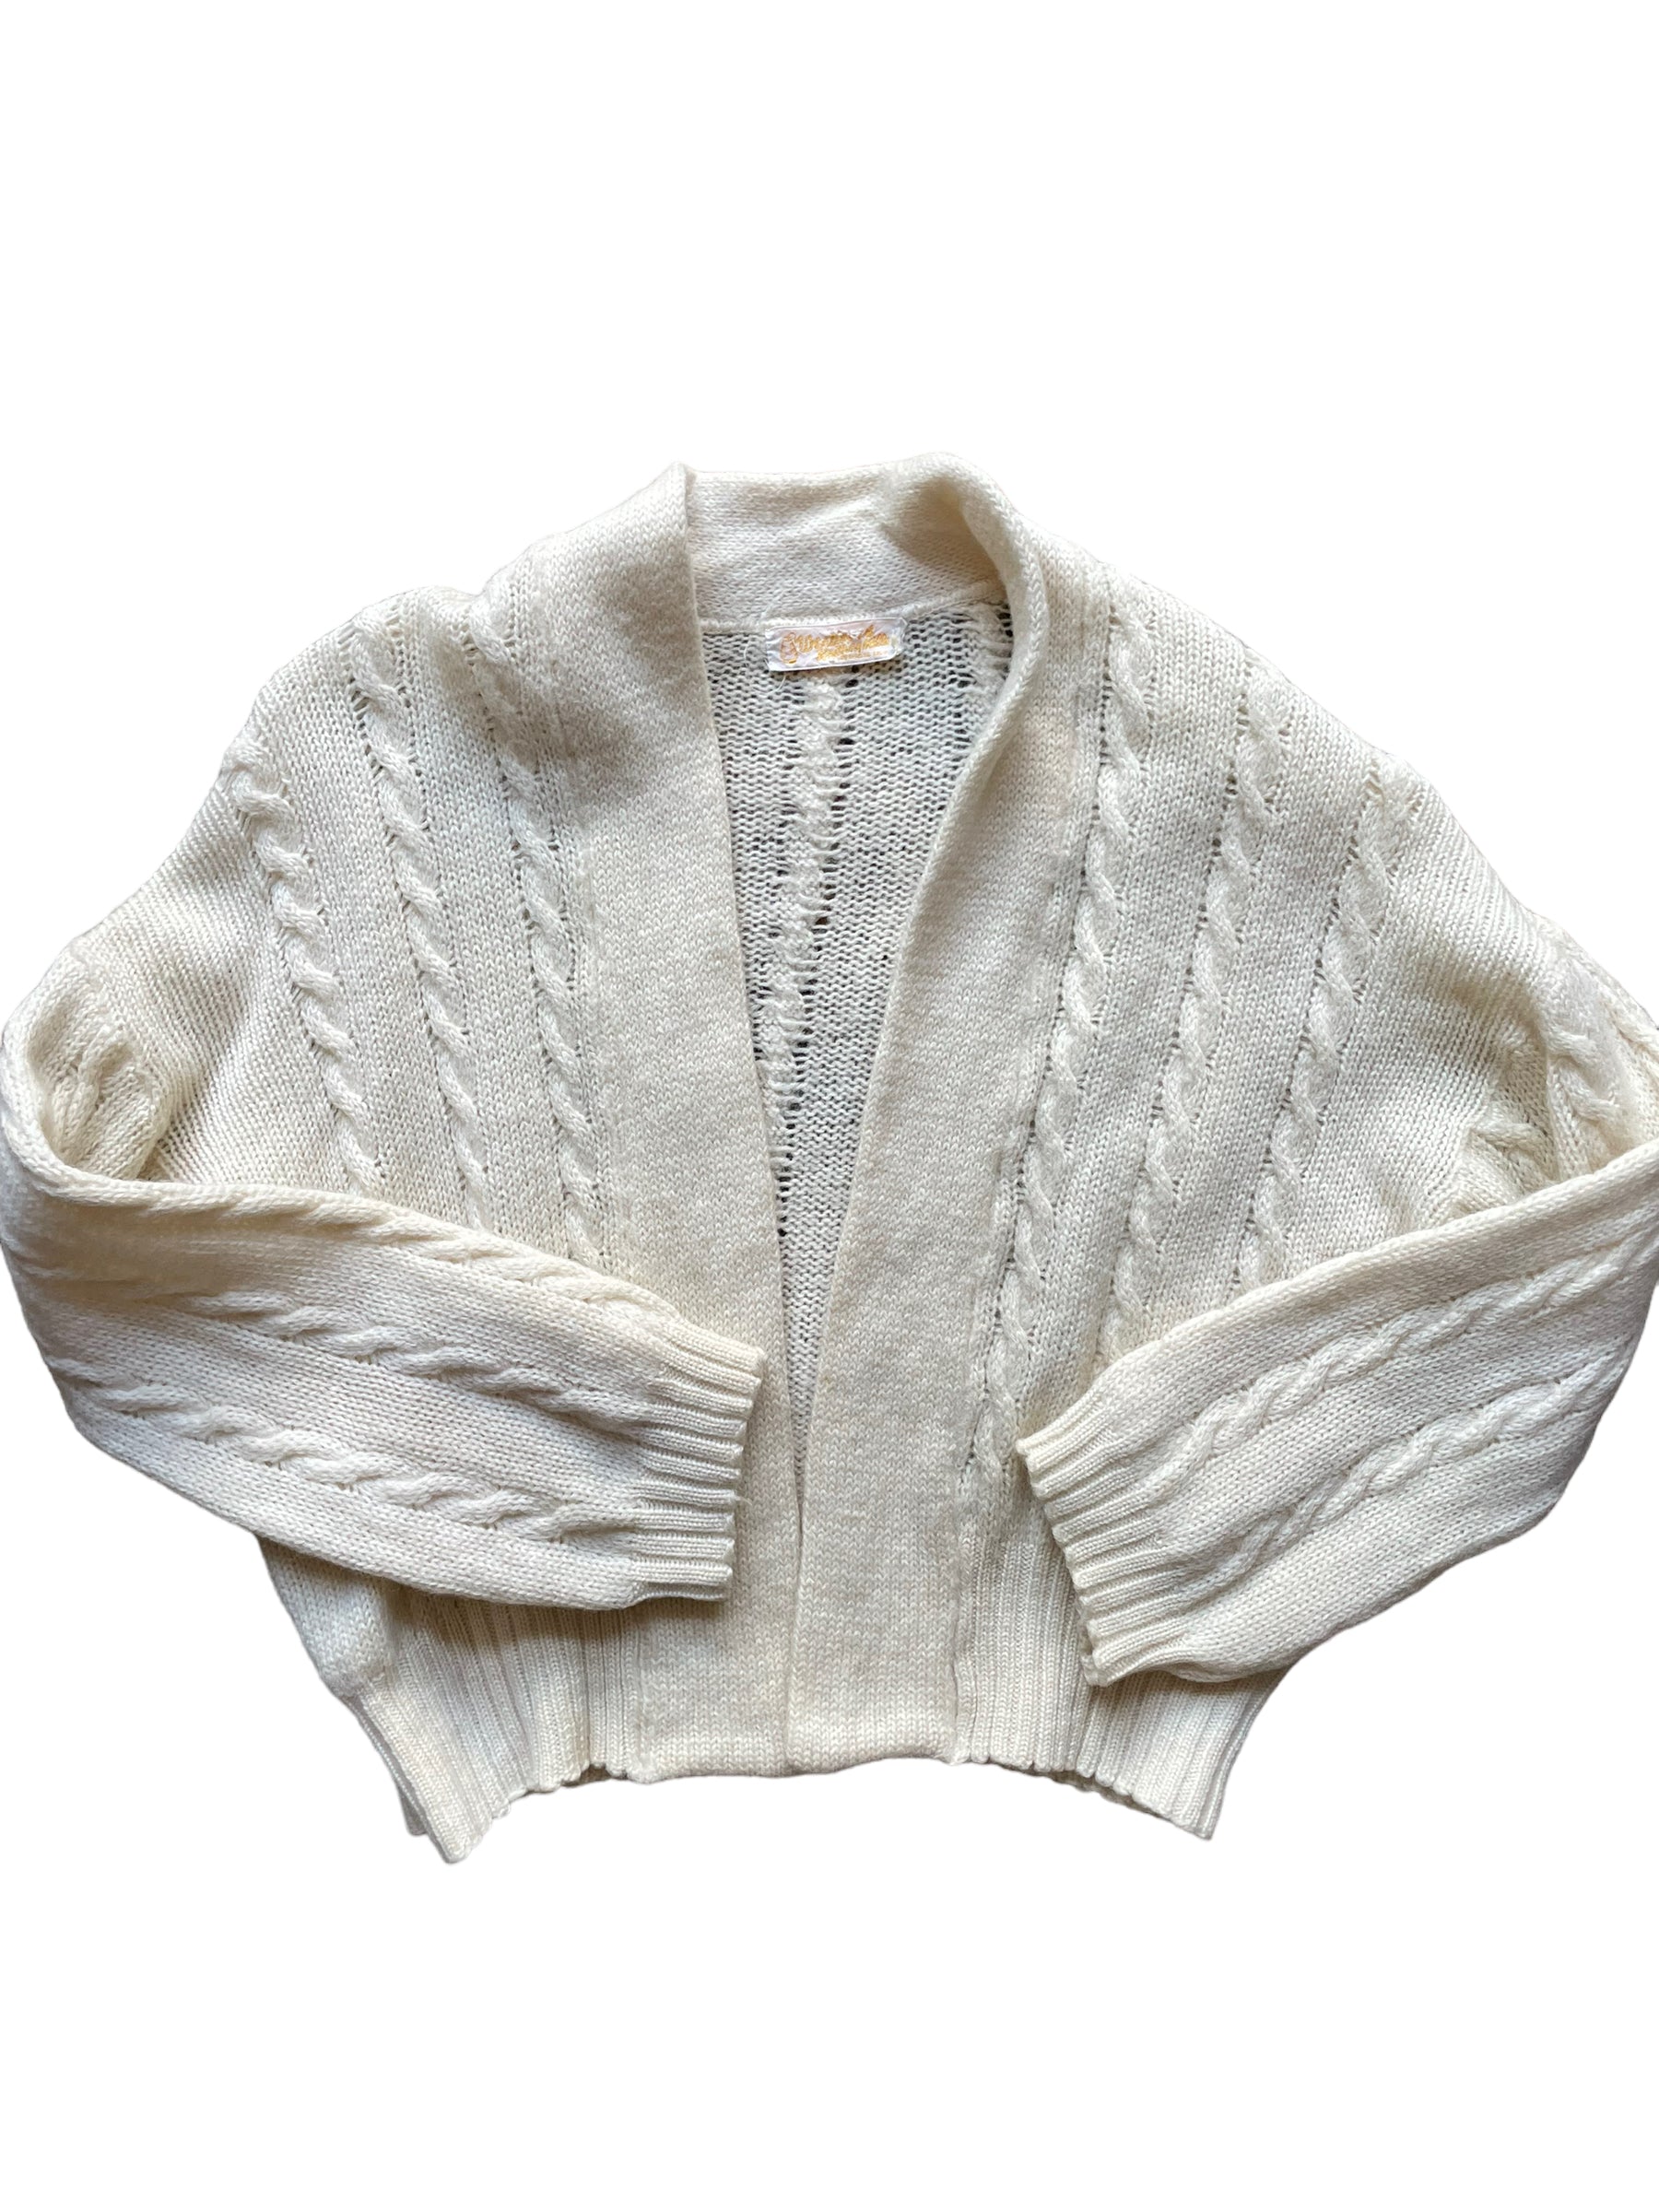 Front flat lay view of Vintage 1950s Cable Knit Cardigan Sweater | Barn Owl Seattle | Seattle True Vintage